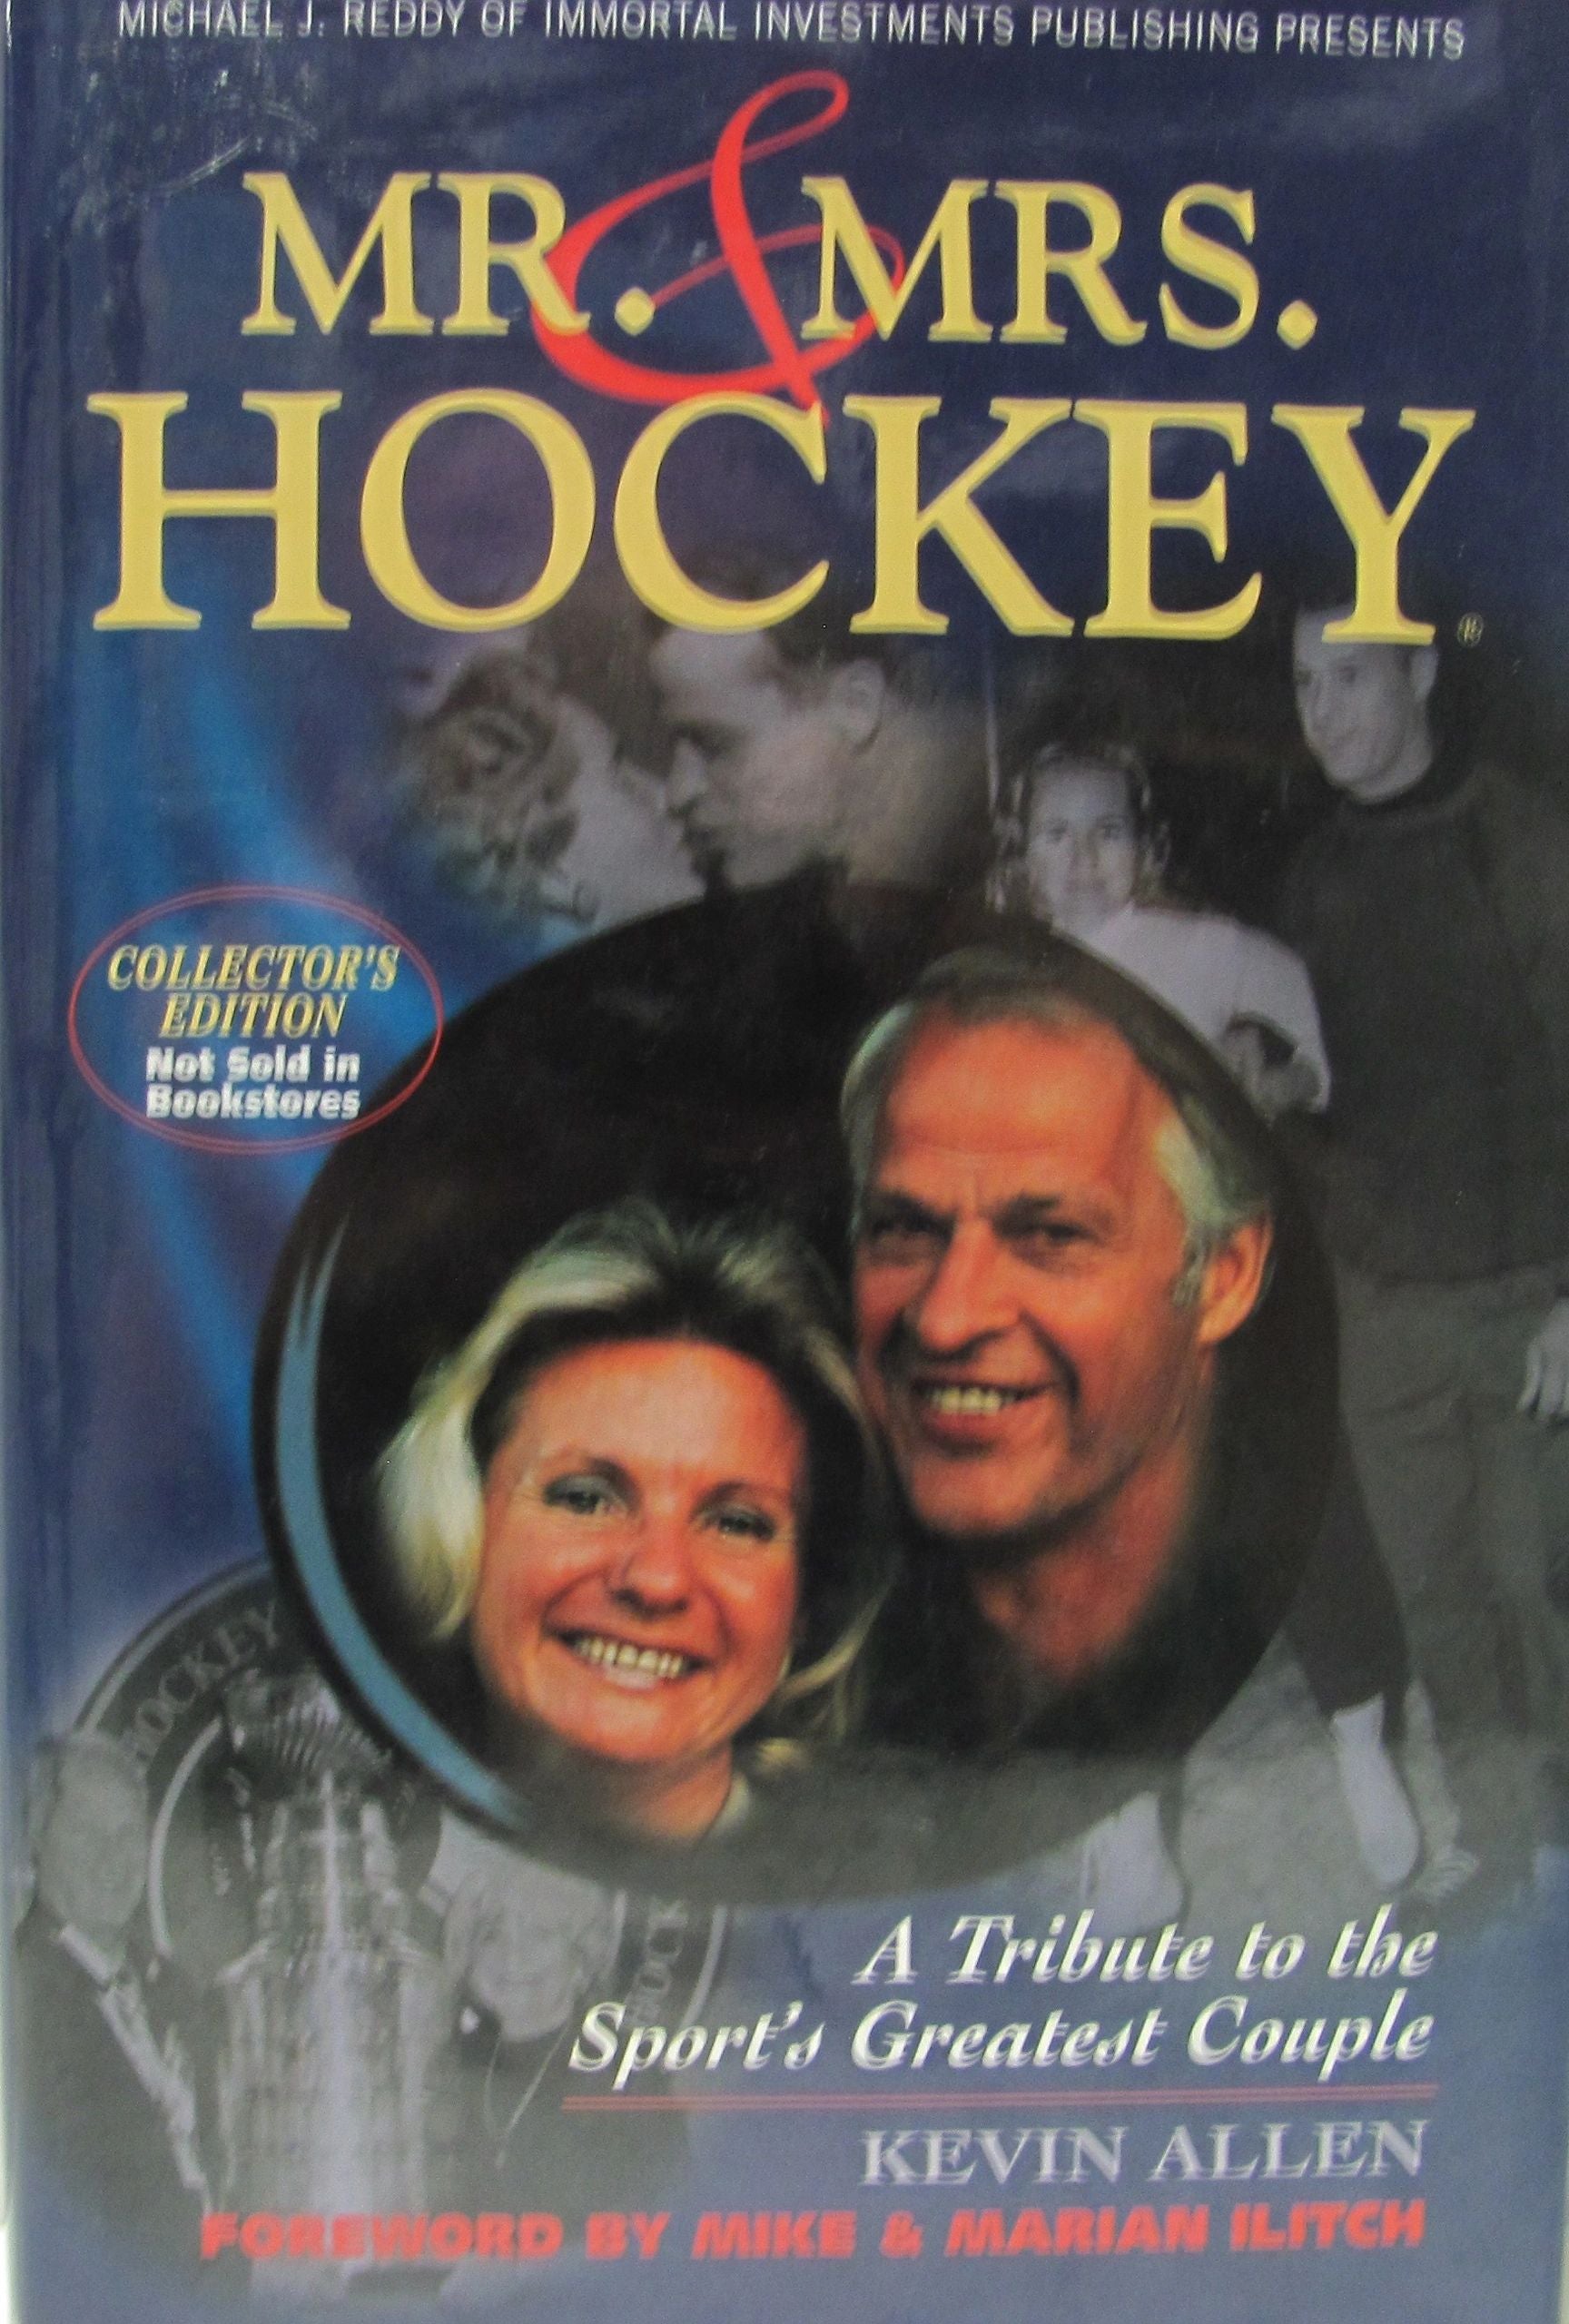 MR. & MRS. HOCKEY a Tribute to the Sport's Greatest Couple (Collector's Edition Not Sold in Bookstores) Signed Copy W/JSA COA